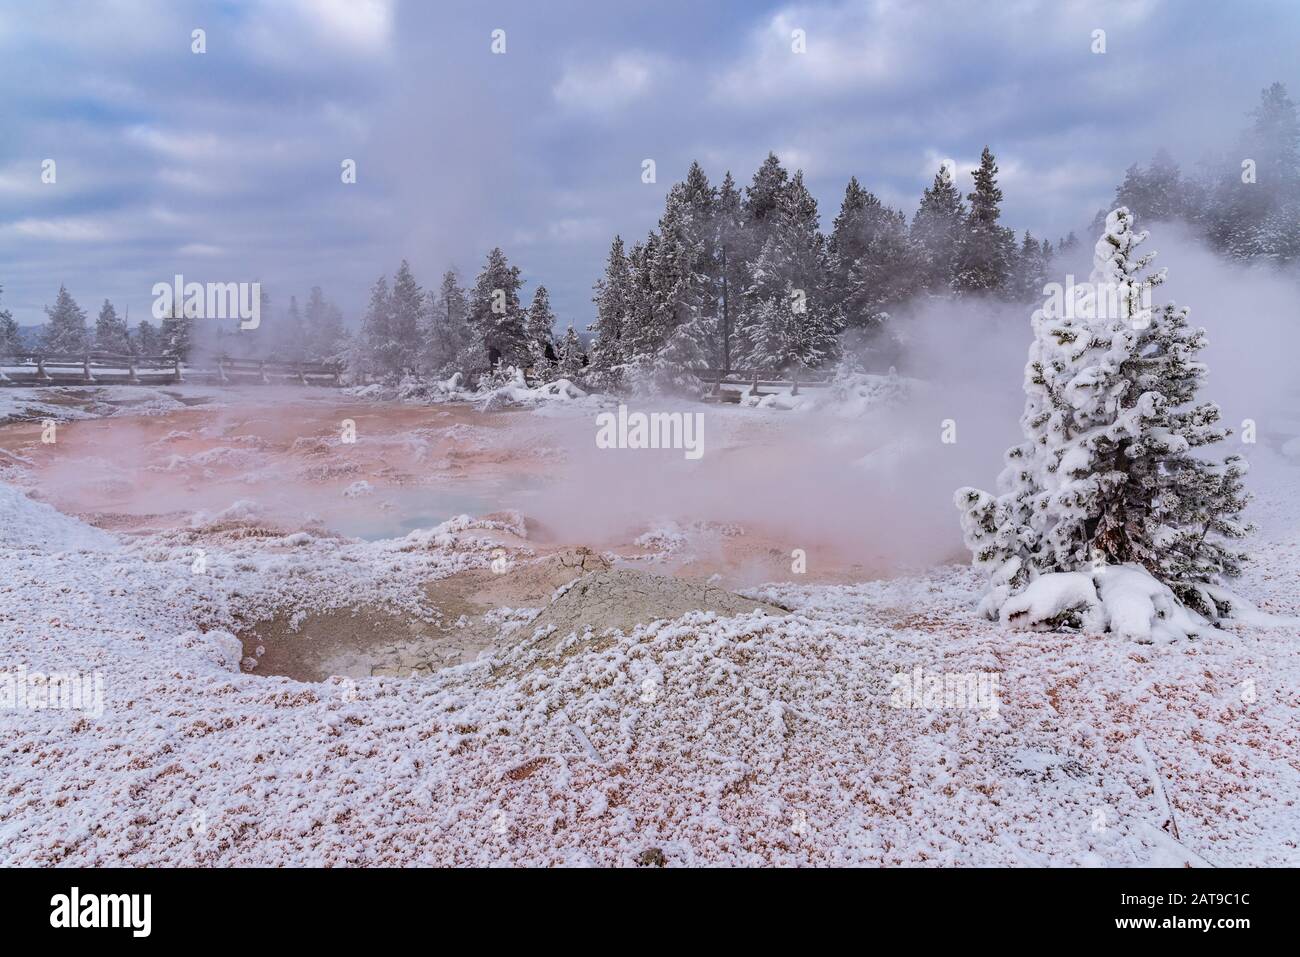 Steam rises from a fumarole in winter. Yellowstone National Park, Wyoming, USA Stock Photo